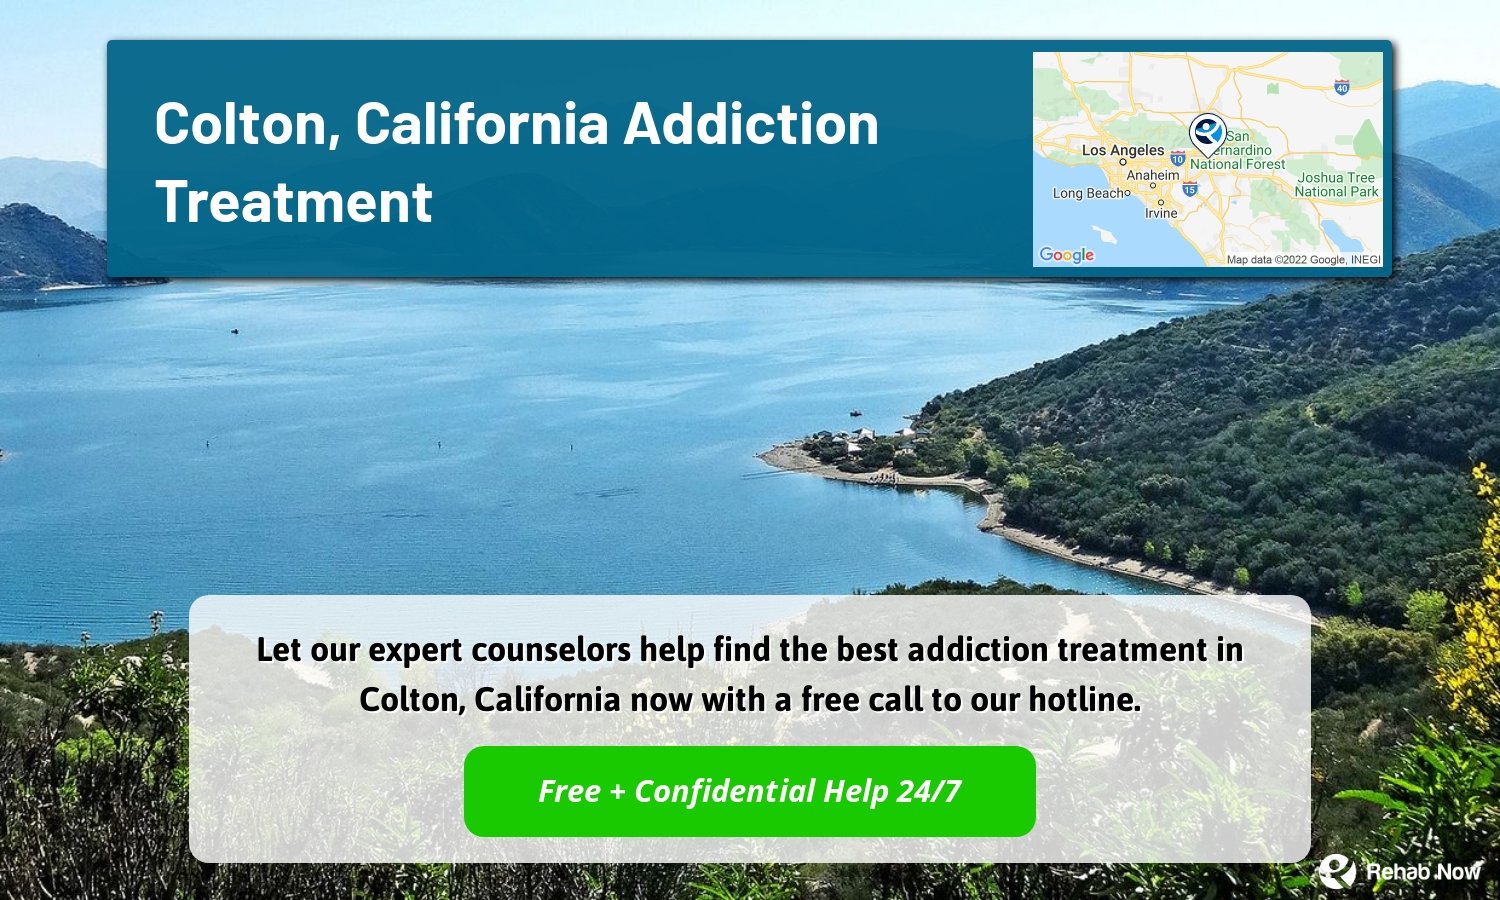 Let our expert counselors help find the best addiction treatment in Colton, California now with a free call to our hotline.